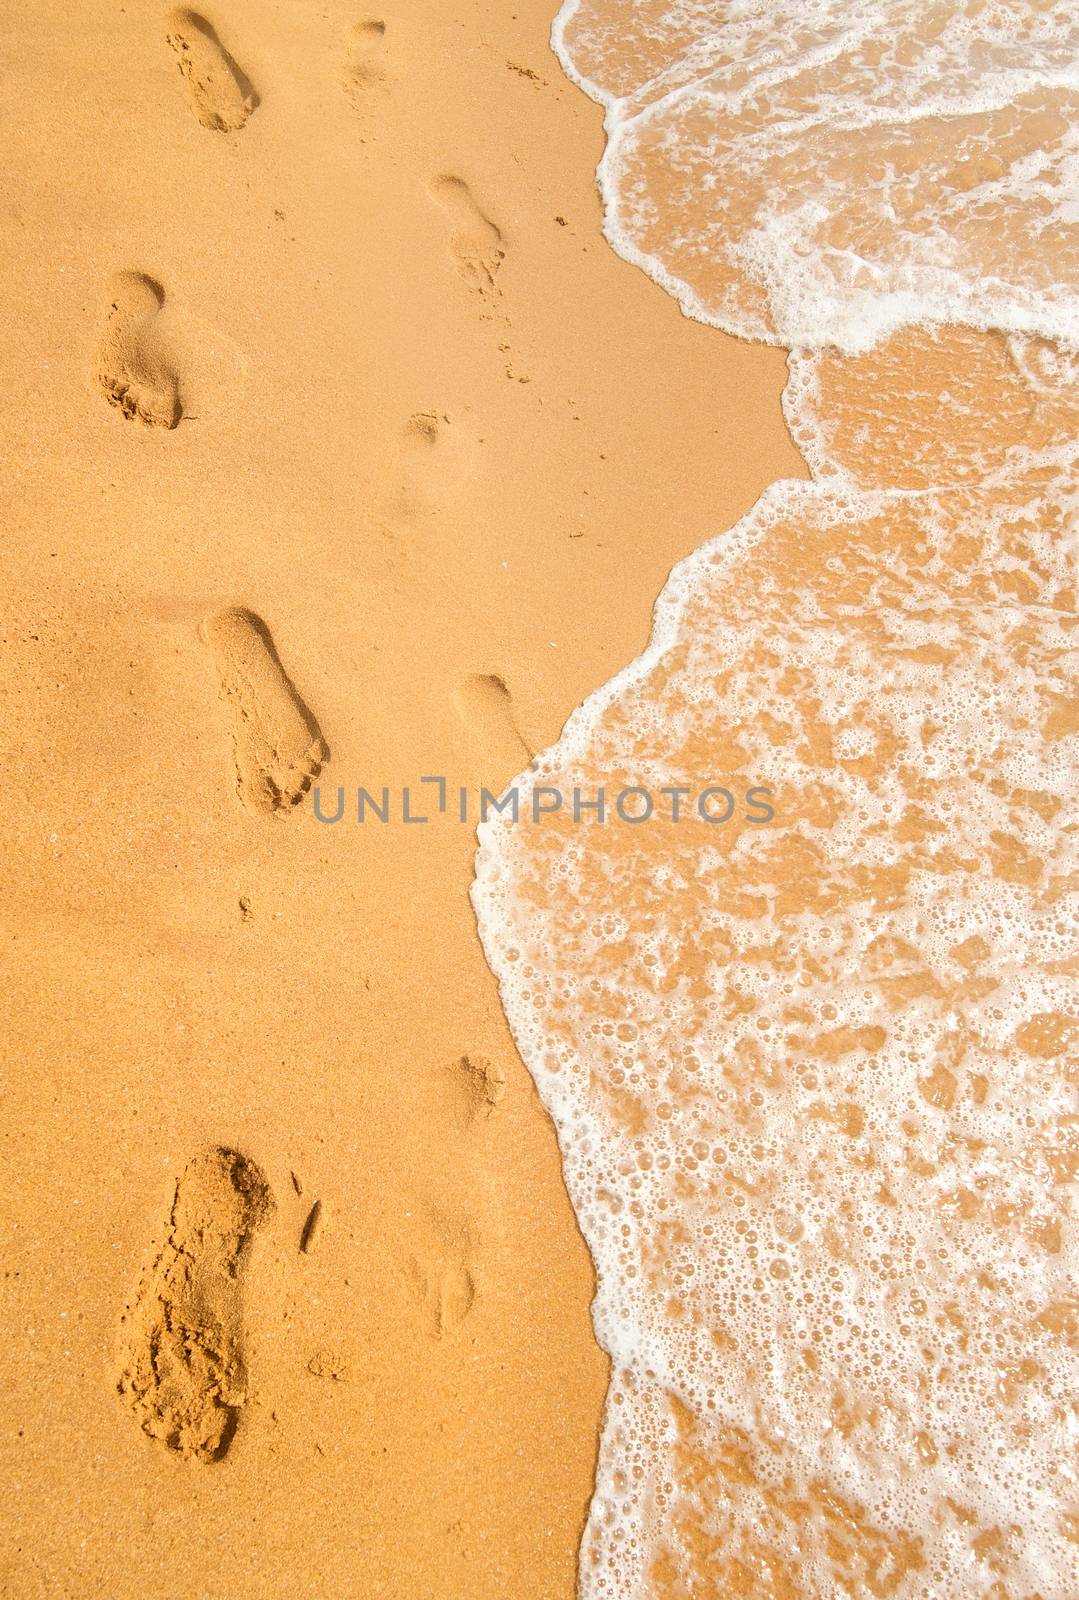 Background of sandy beach and ocean wave